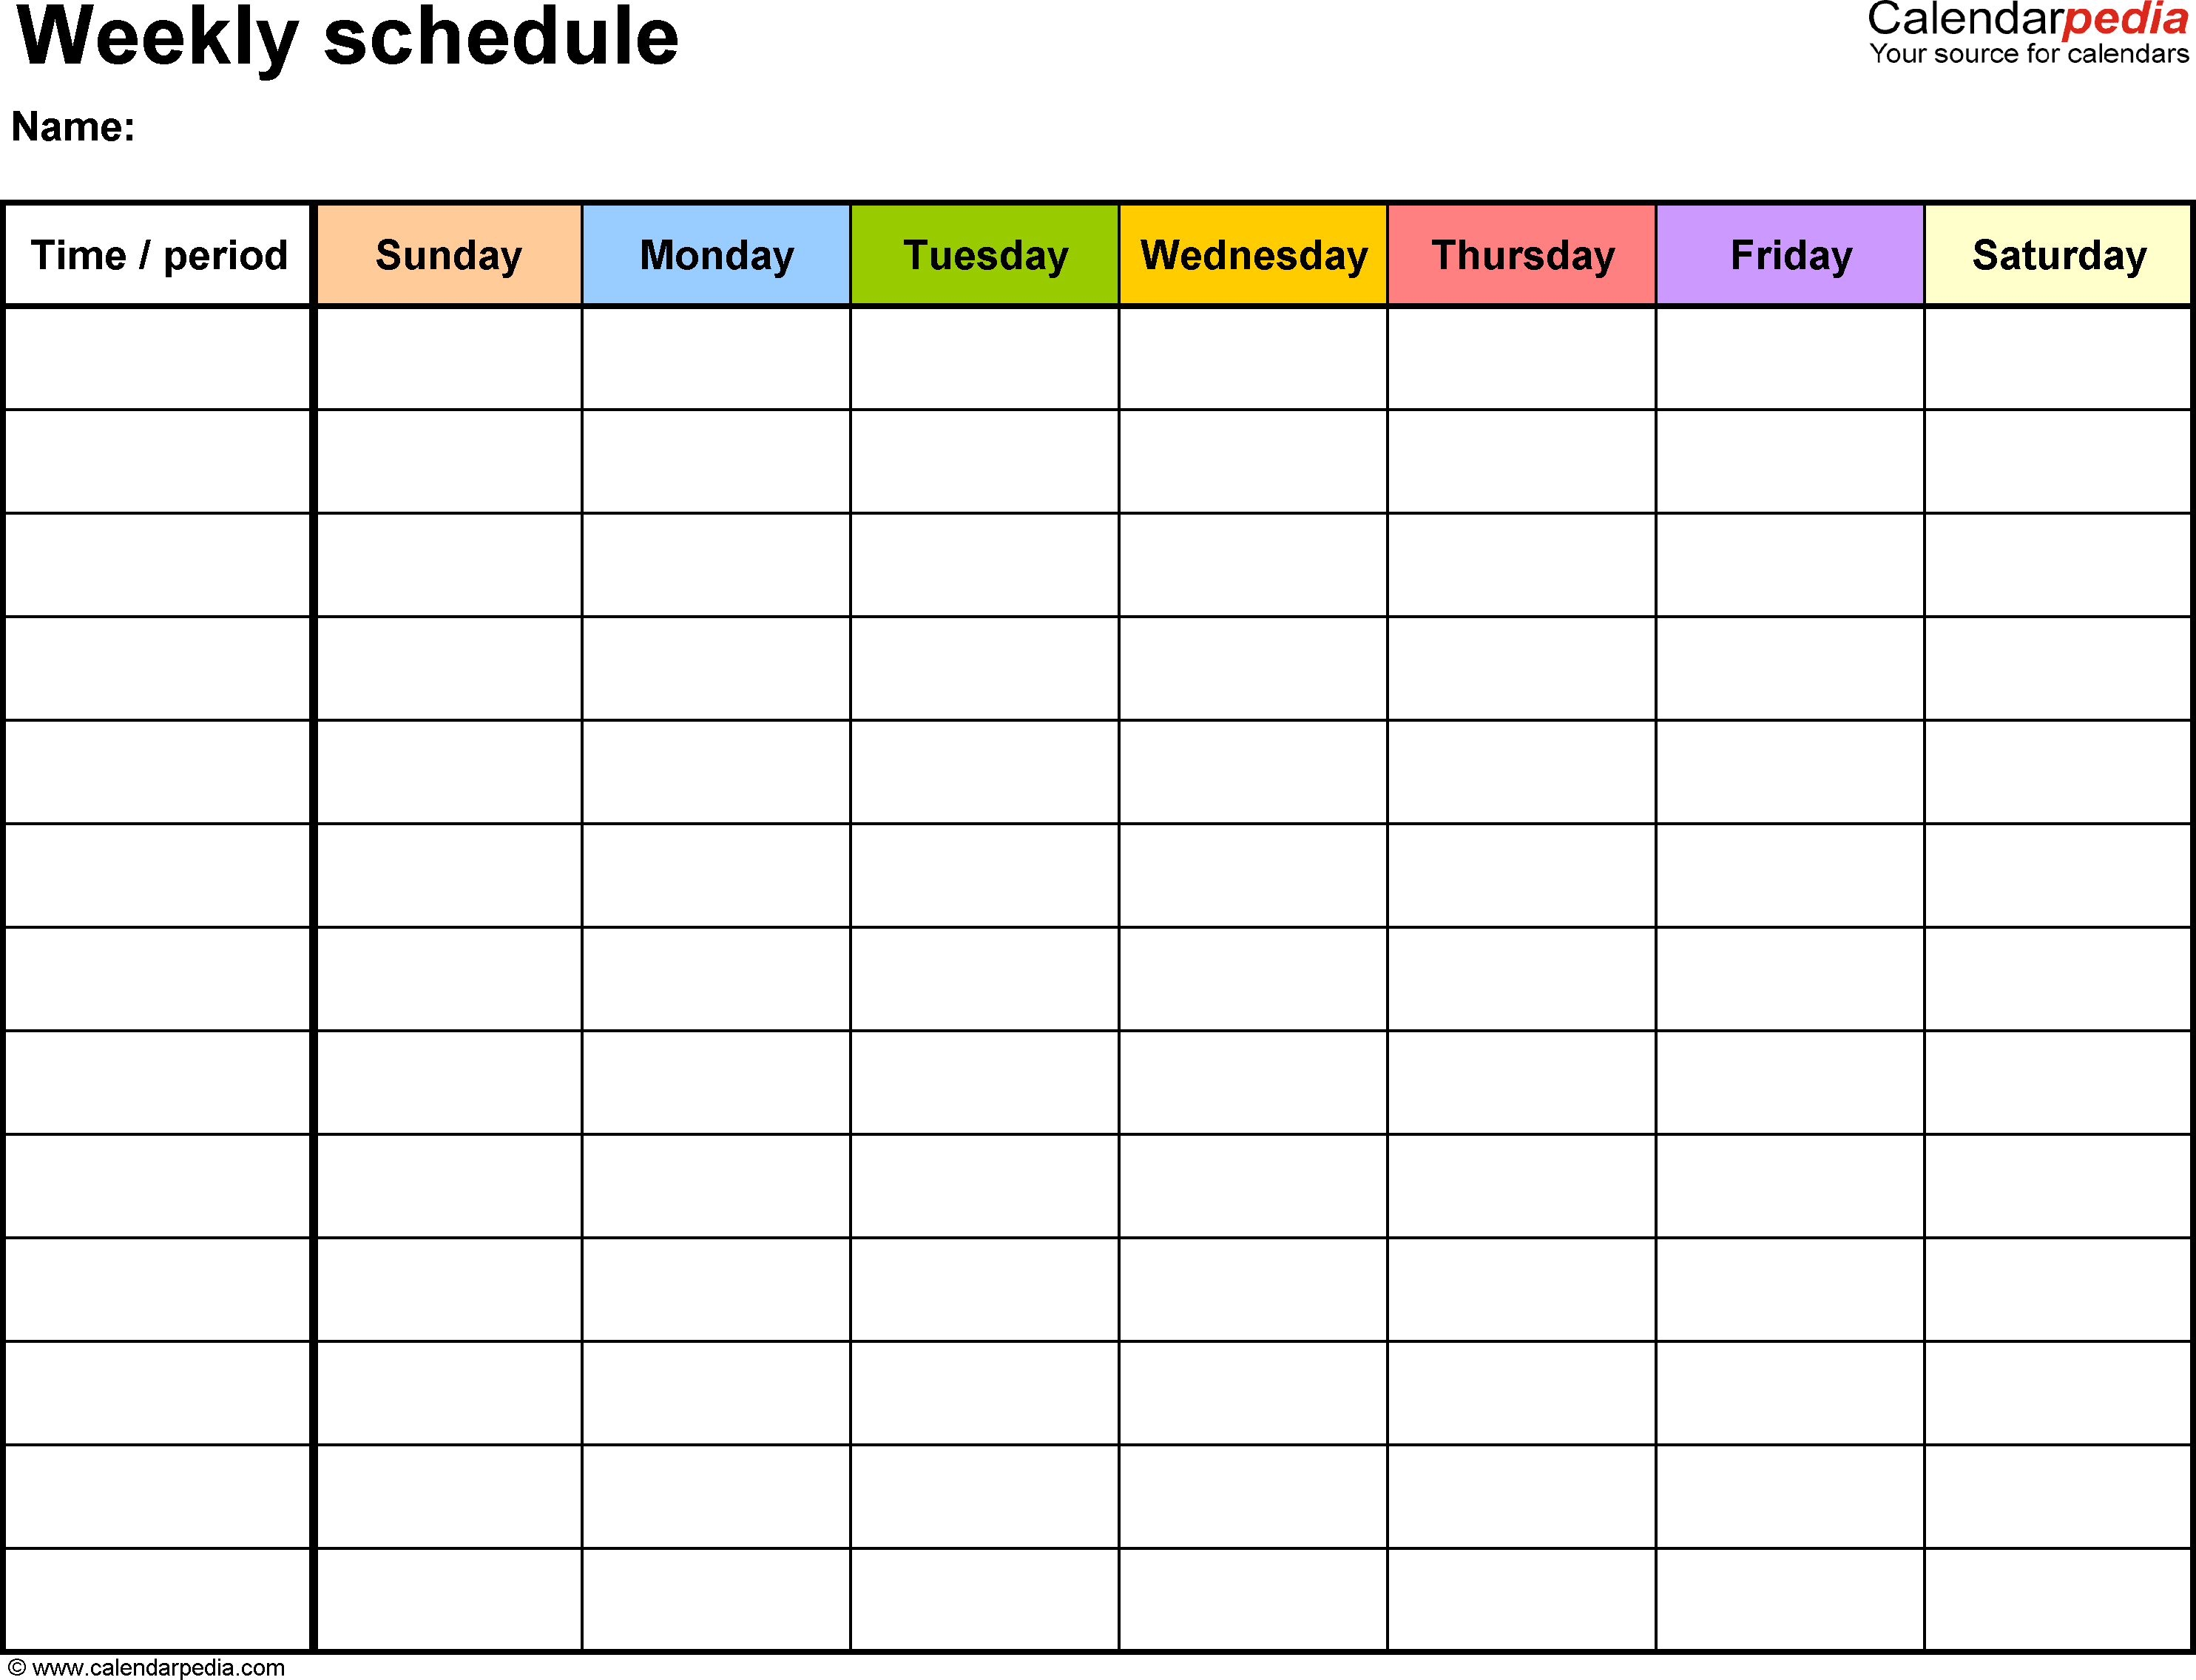 Weekly Schedule Spreadsheet Inside Free Weekly Schedule Templates For Excel  18 Templates